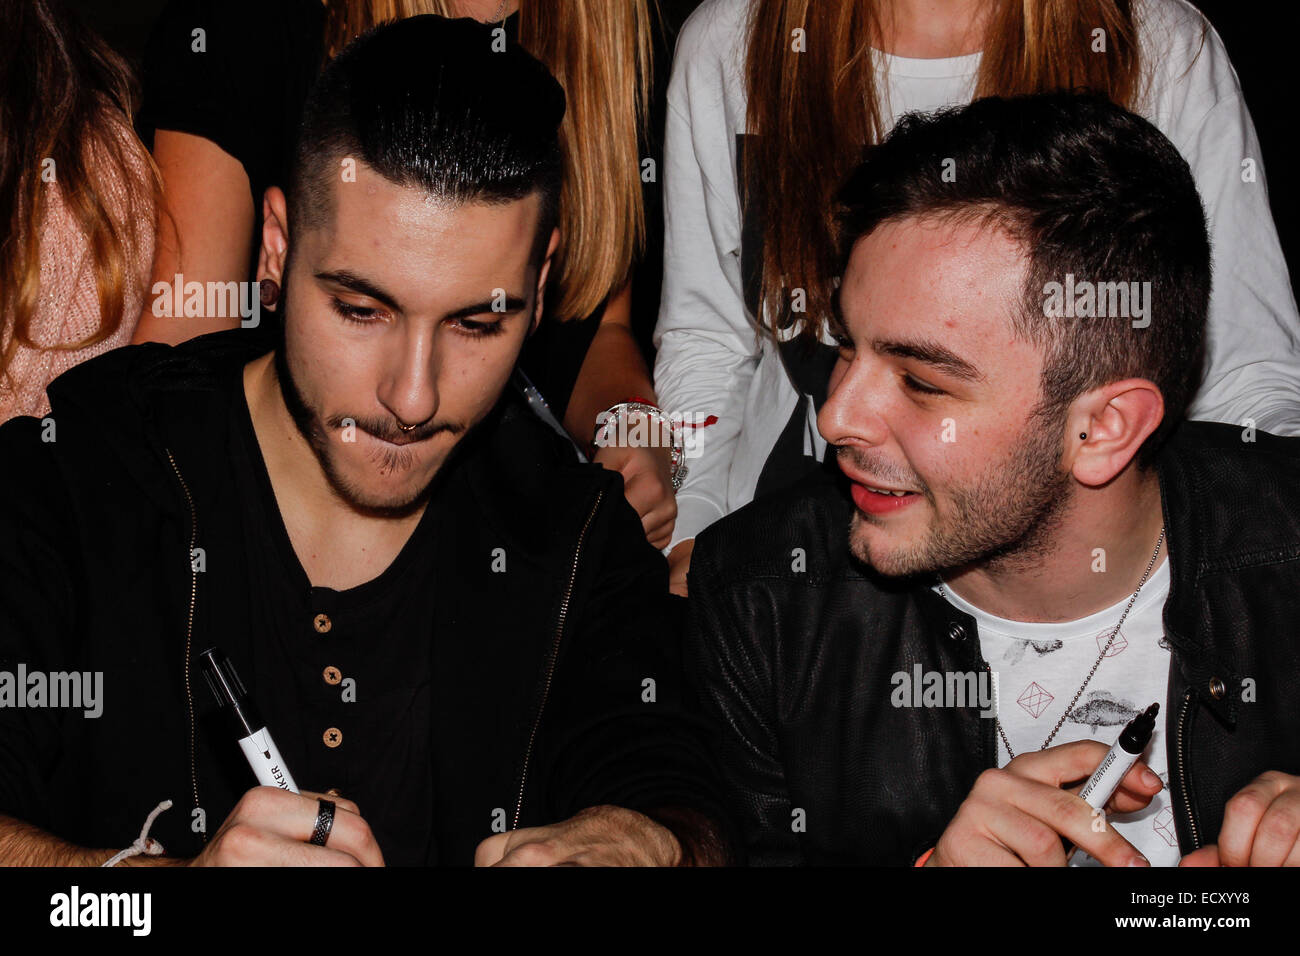 Italy. 21st Dec, 2014. The X Factor 2014 winner, Lorenzo Fragola (right), and Madh, second placer at the shopping center 8 Gallery to sign copies of EP to their fans. Credit:  Elena Aquila/Pacific Press/Alamy Live News Stock Photo